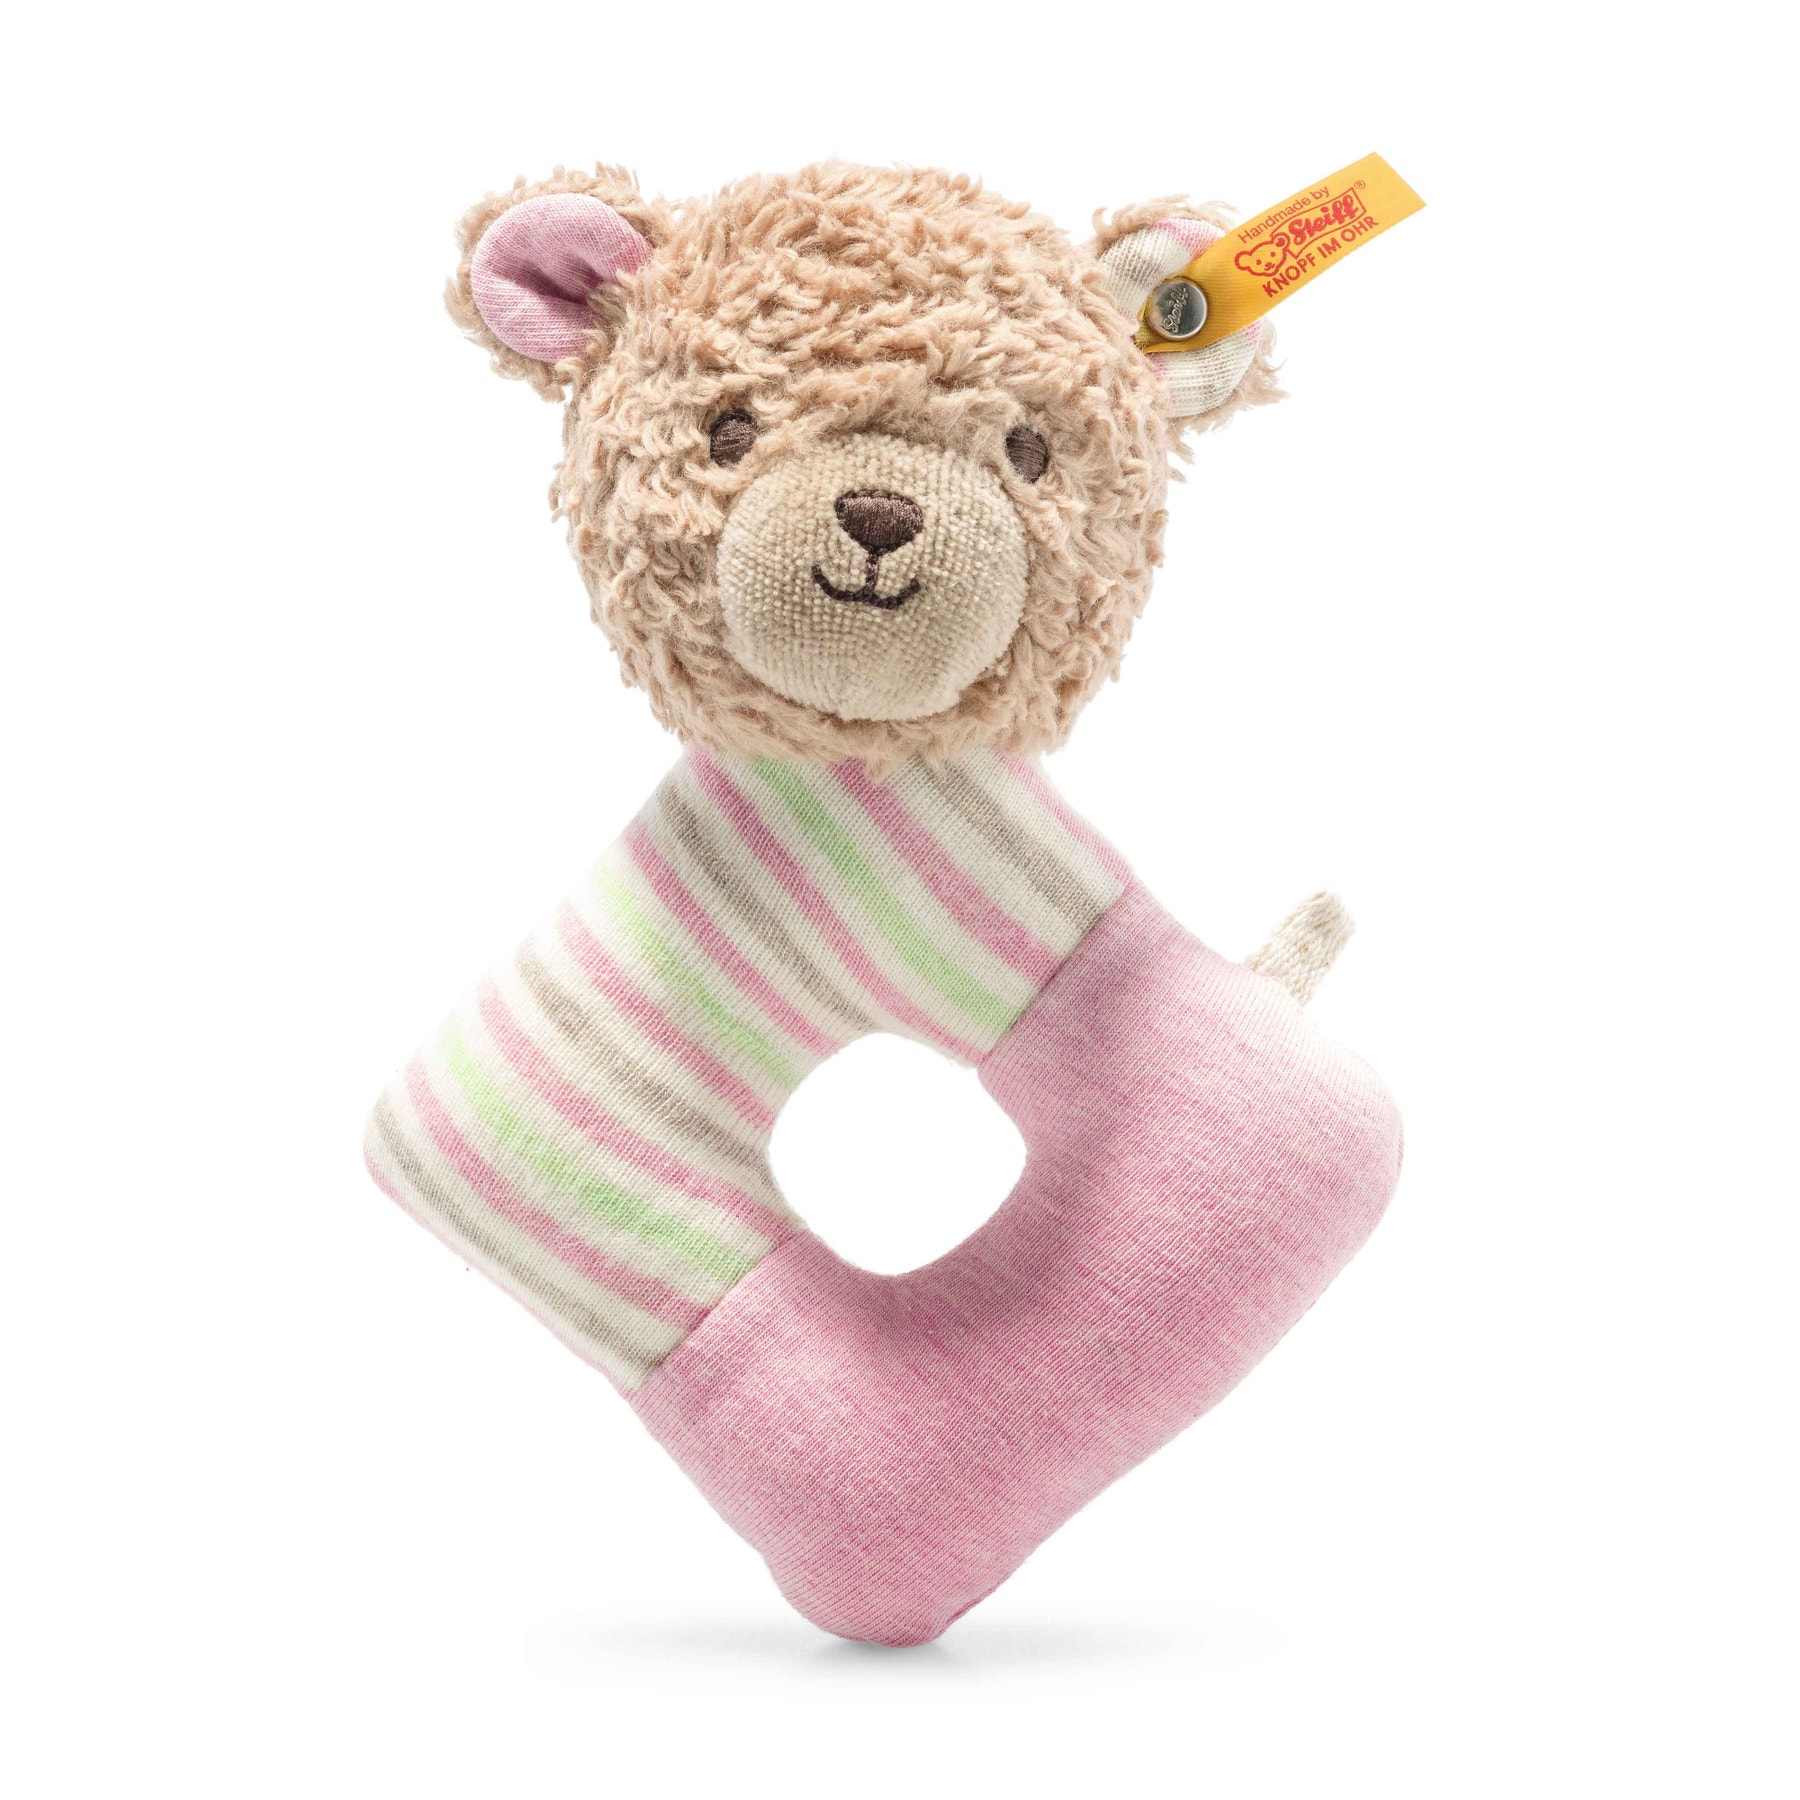 GOTS Rosy Teddy bear grip toy with rattle